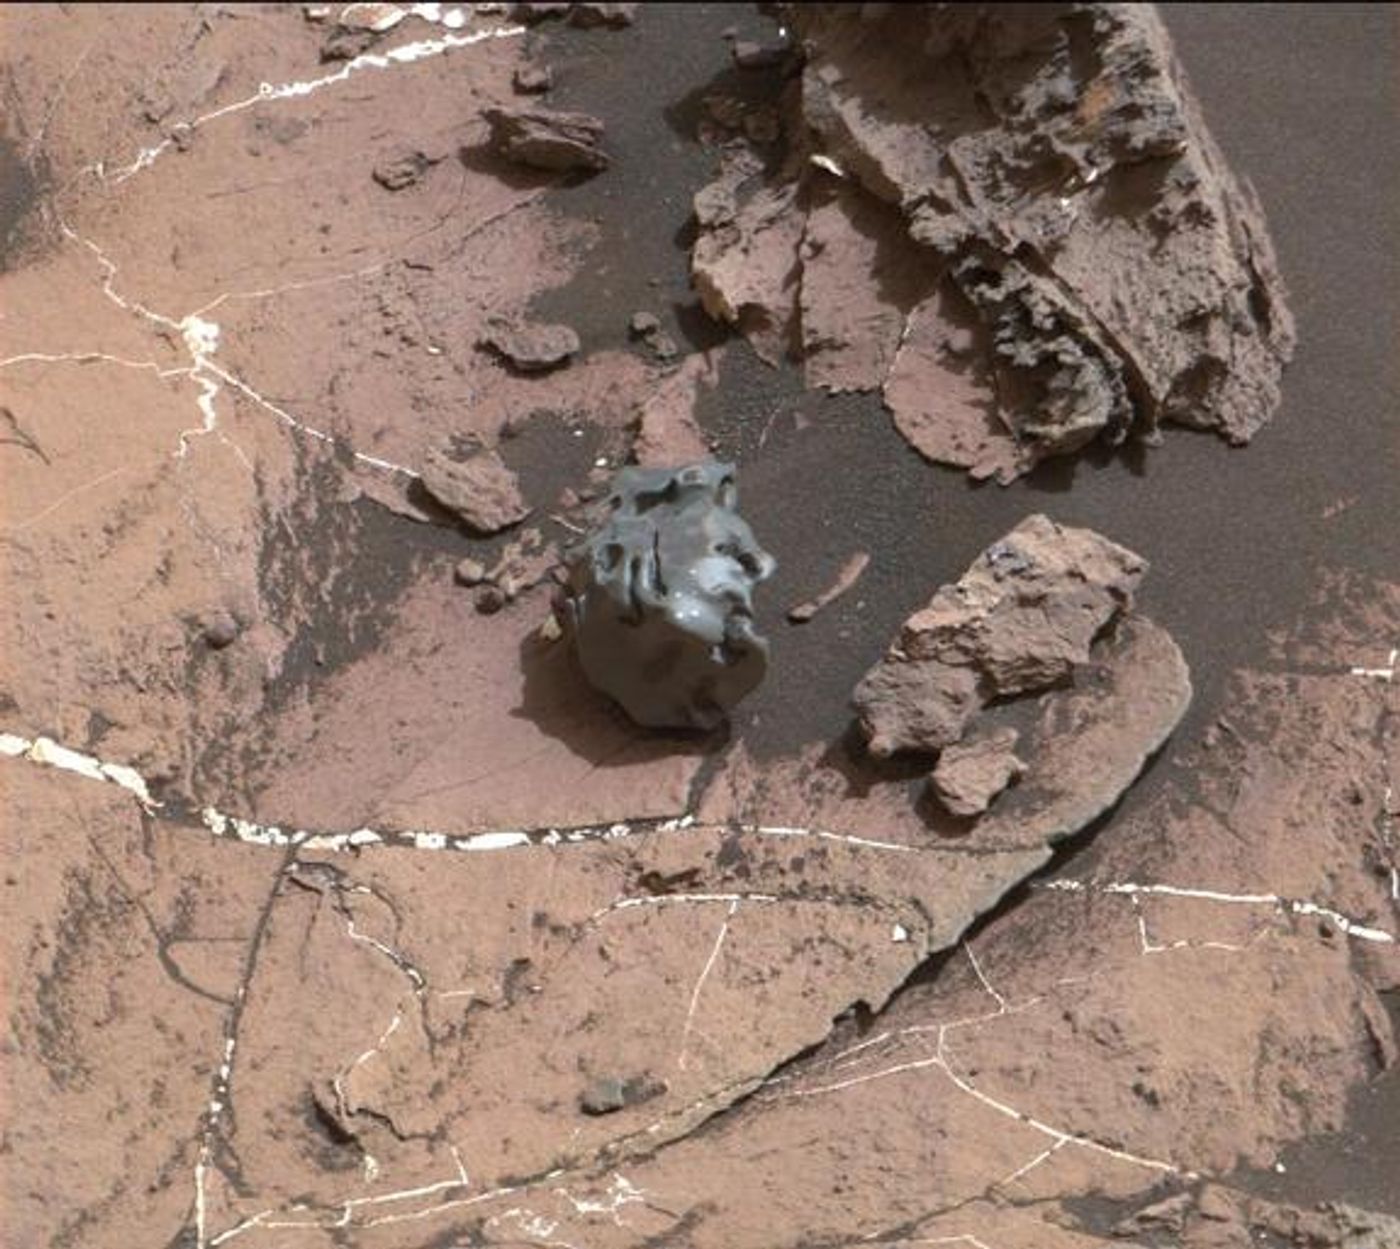 The strange egg-shaped hunk of metallic asteroid core fragment was discovered on Mars at the end of October by the Curiosity rover.